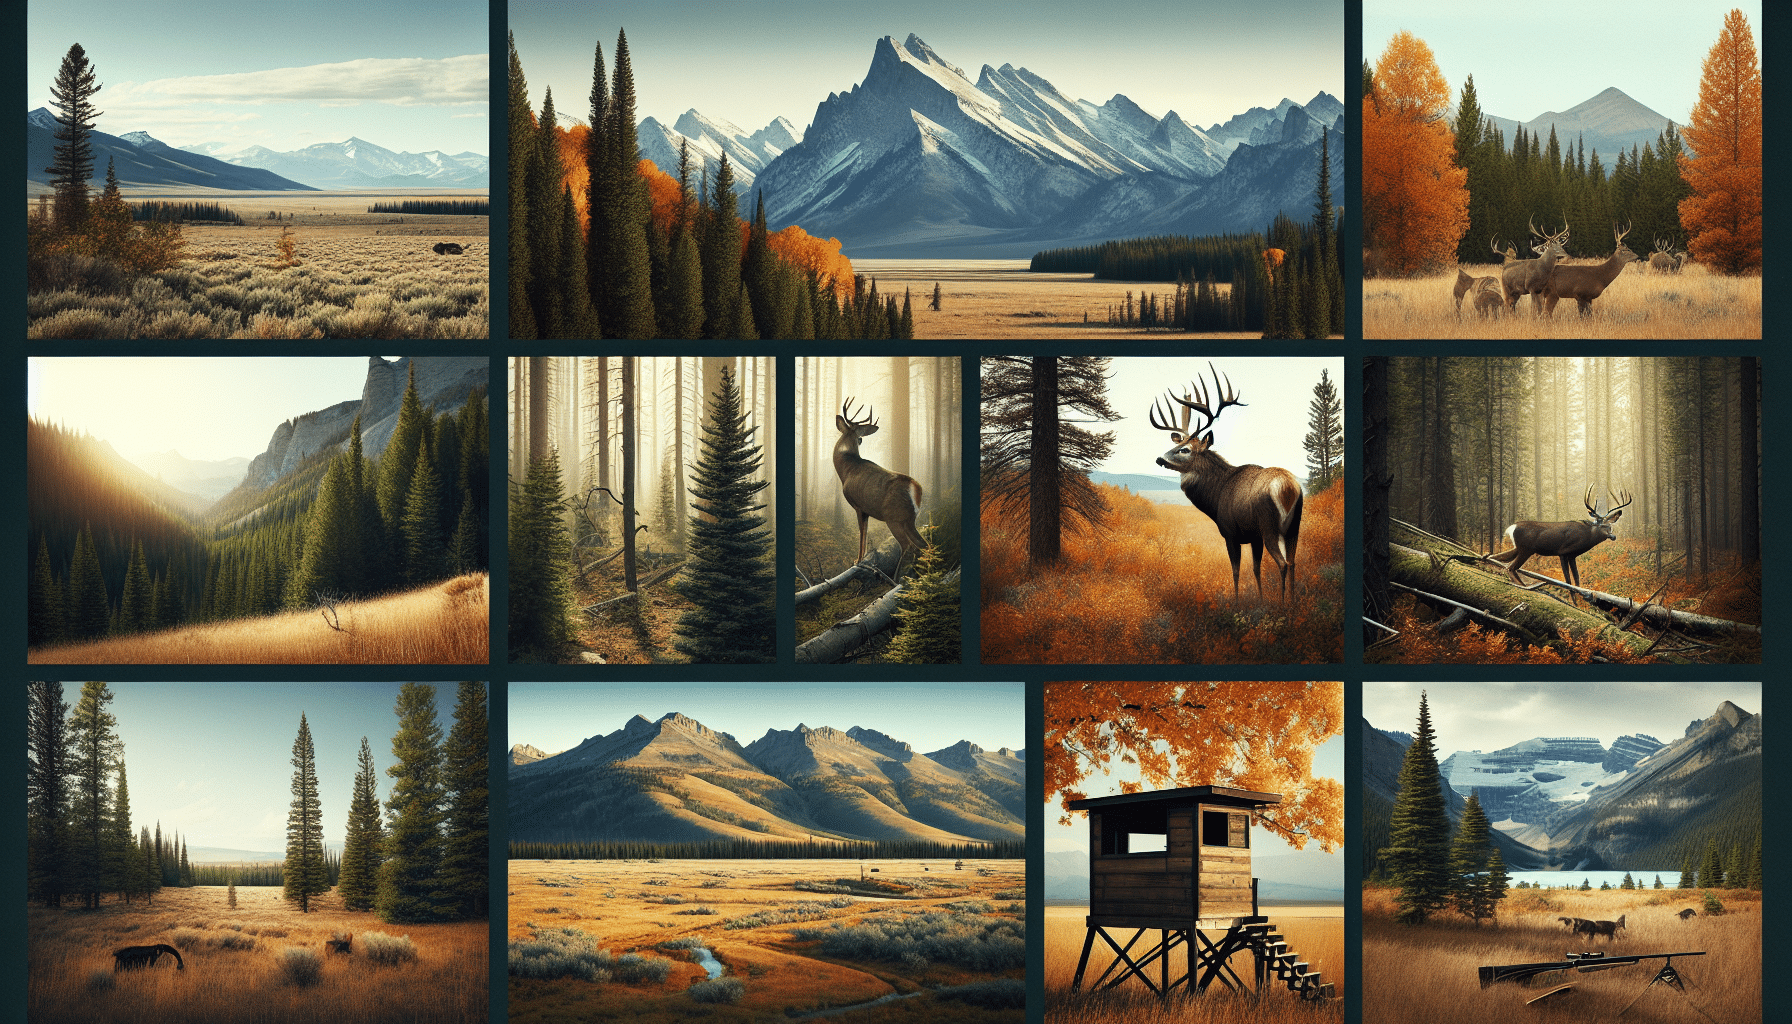 An image showcasing various elements of deer hunting in Wyoming: the expansive landscape with mountains in the distance, the serene forests with towering pines and autumn-colored deciduous trees, and open fields of unspoiled wilderness. Highlight elements that suggest hunting strategies, such as trails, animal prints, or a strategically placed blind for hunting. Excluding human presence, the scene feels tranquil and untouched. Evoke a sense of adventure and exploration without any text, personal items, or brand names.